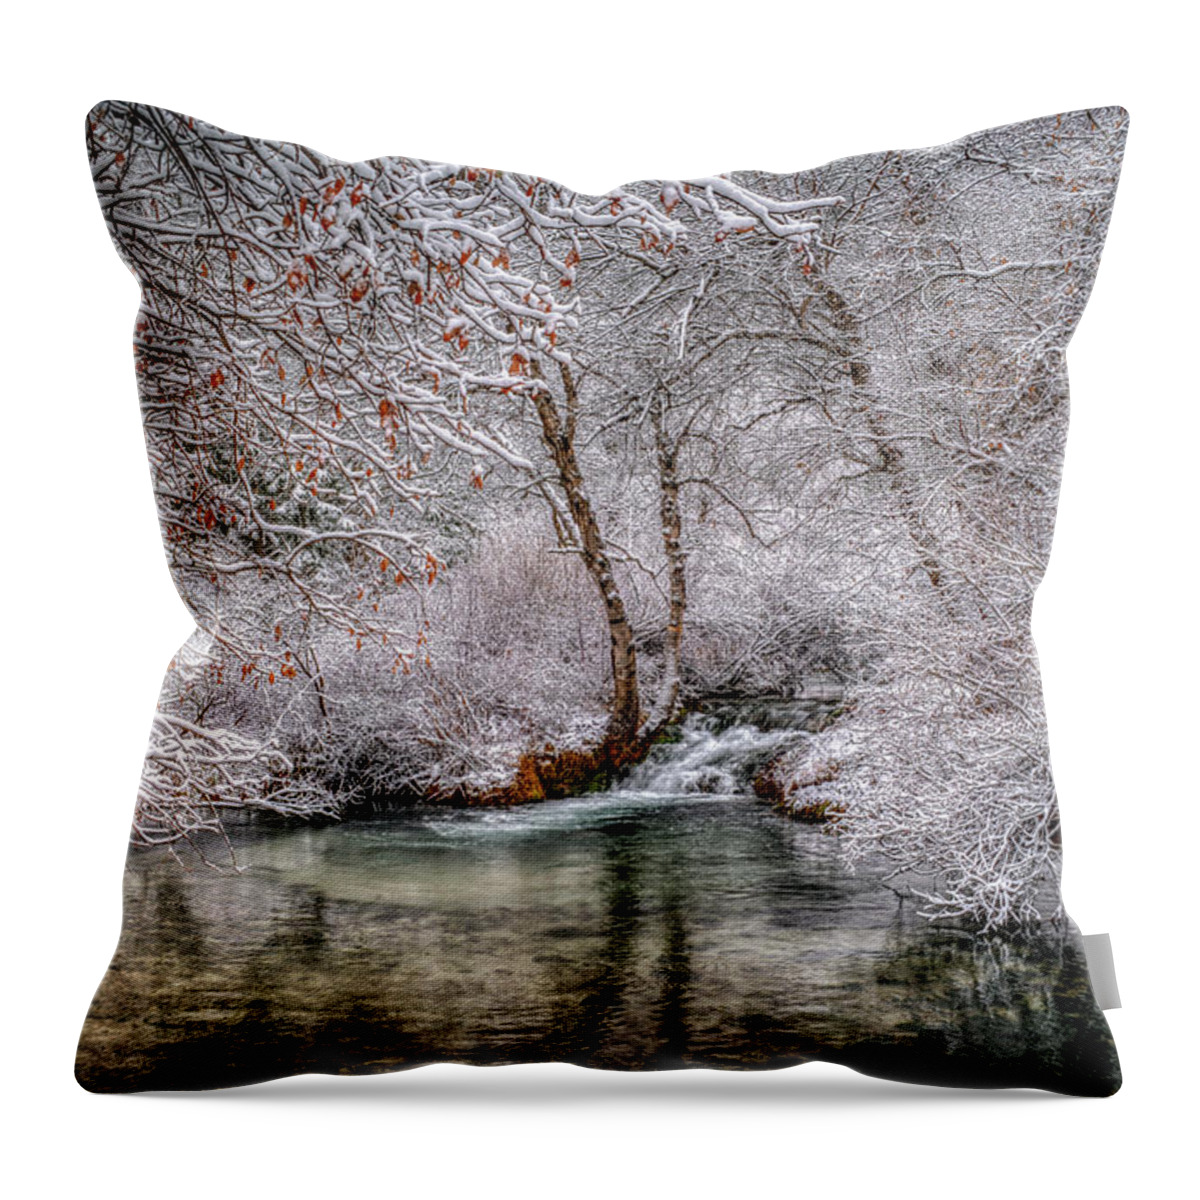 Frosty Throw Pillow featuring the photograph Frosty Pond by Fiskr Larsen